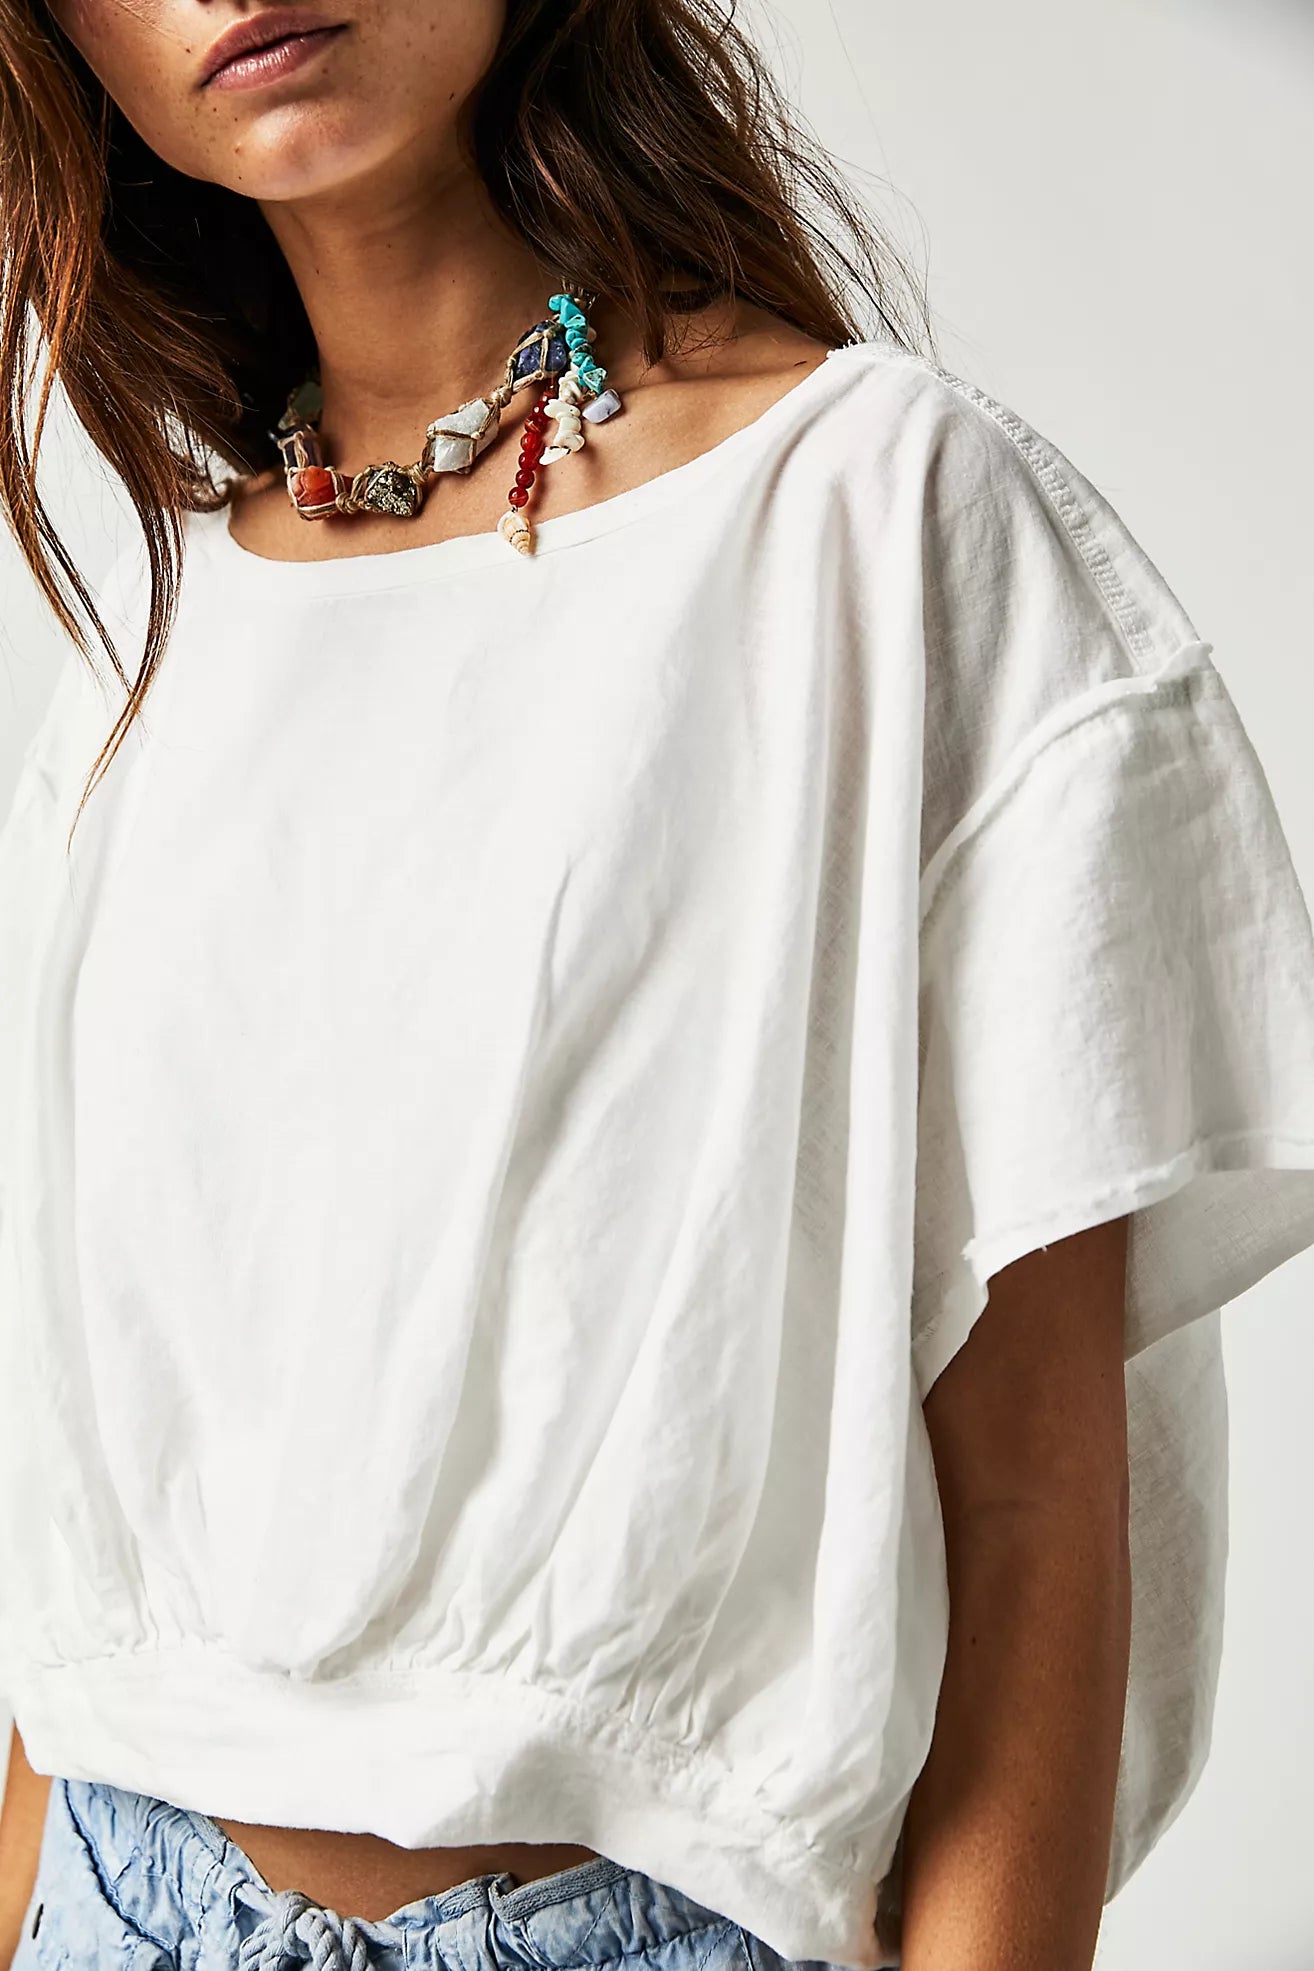 light weight white top free people